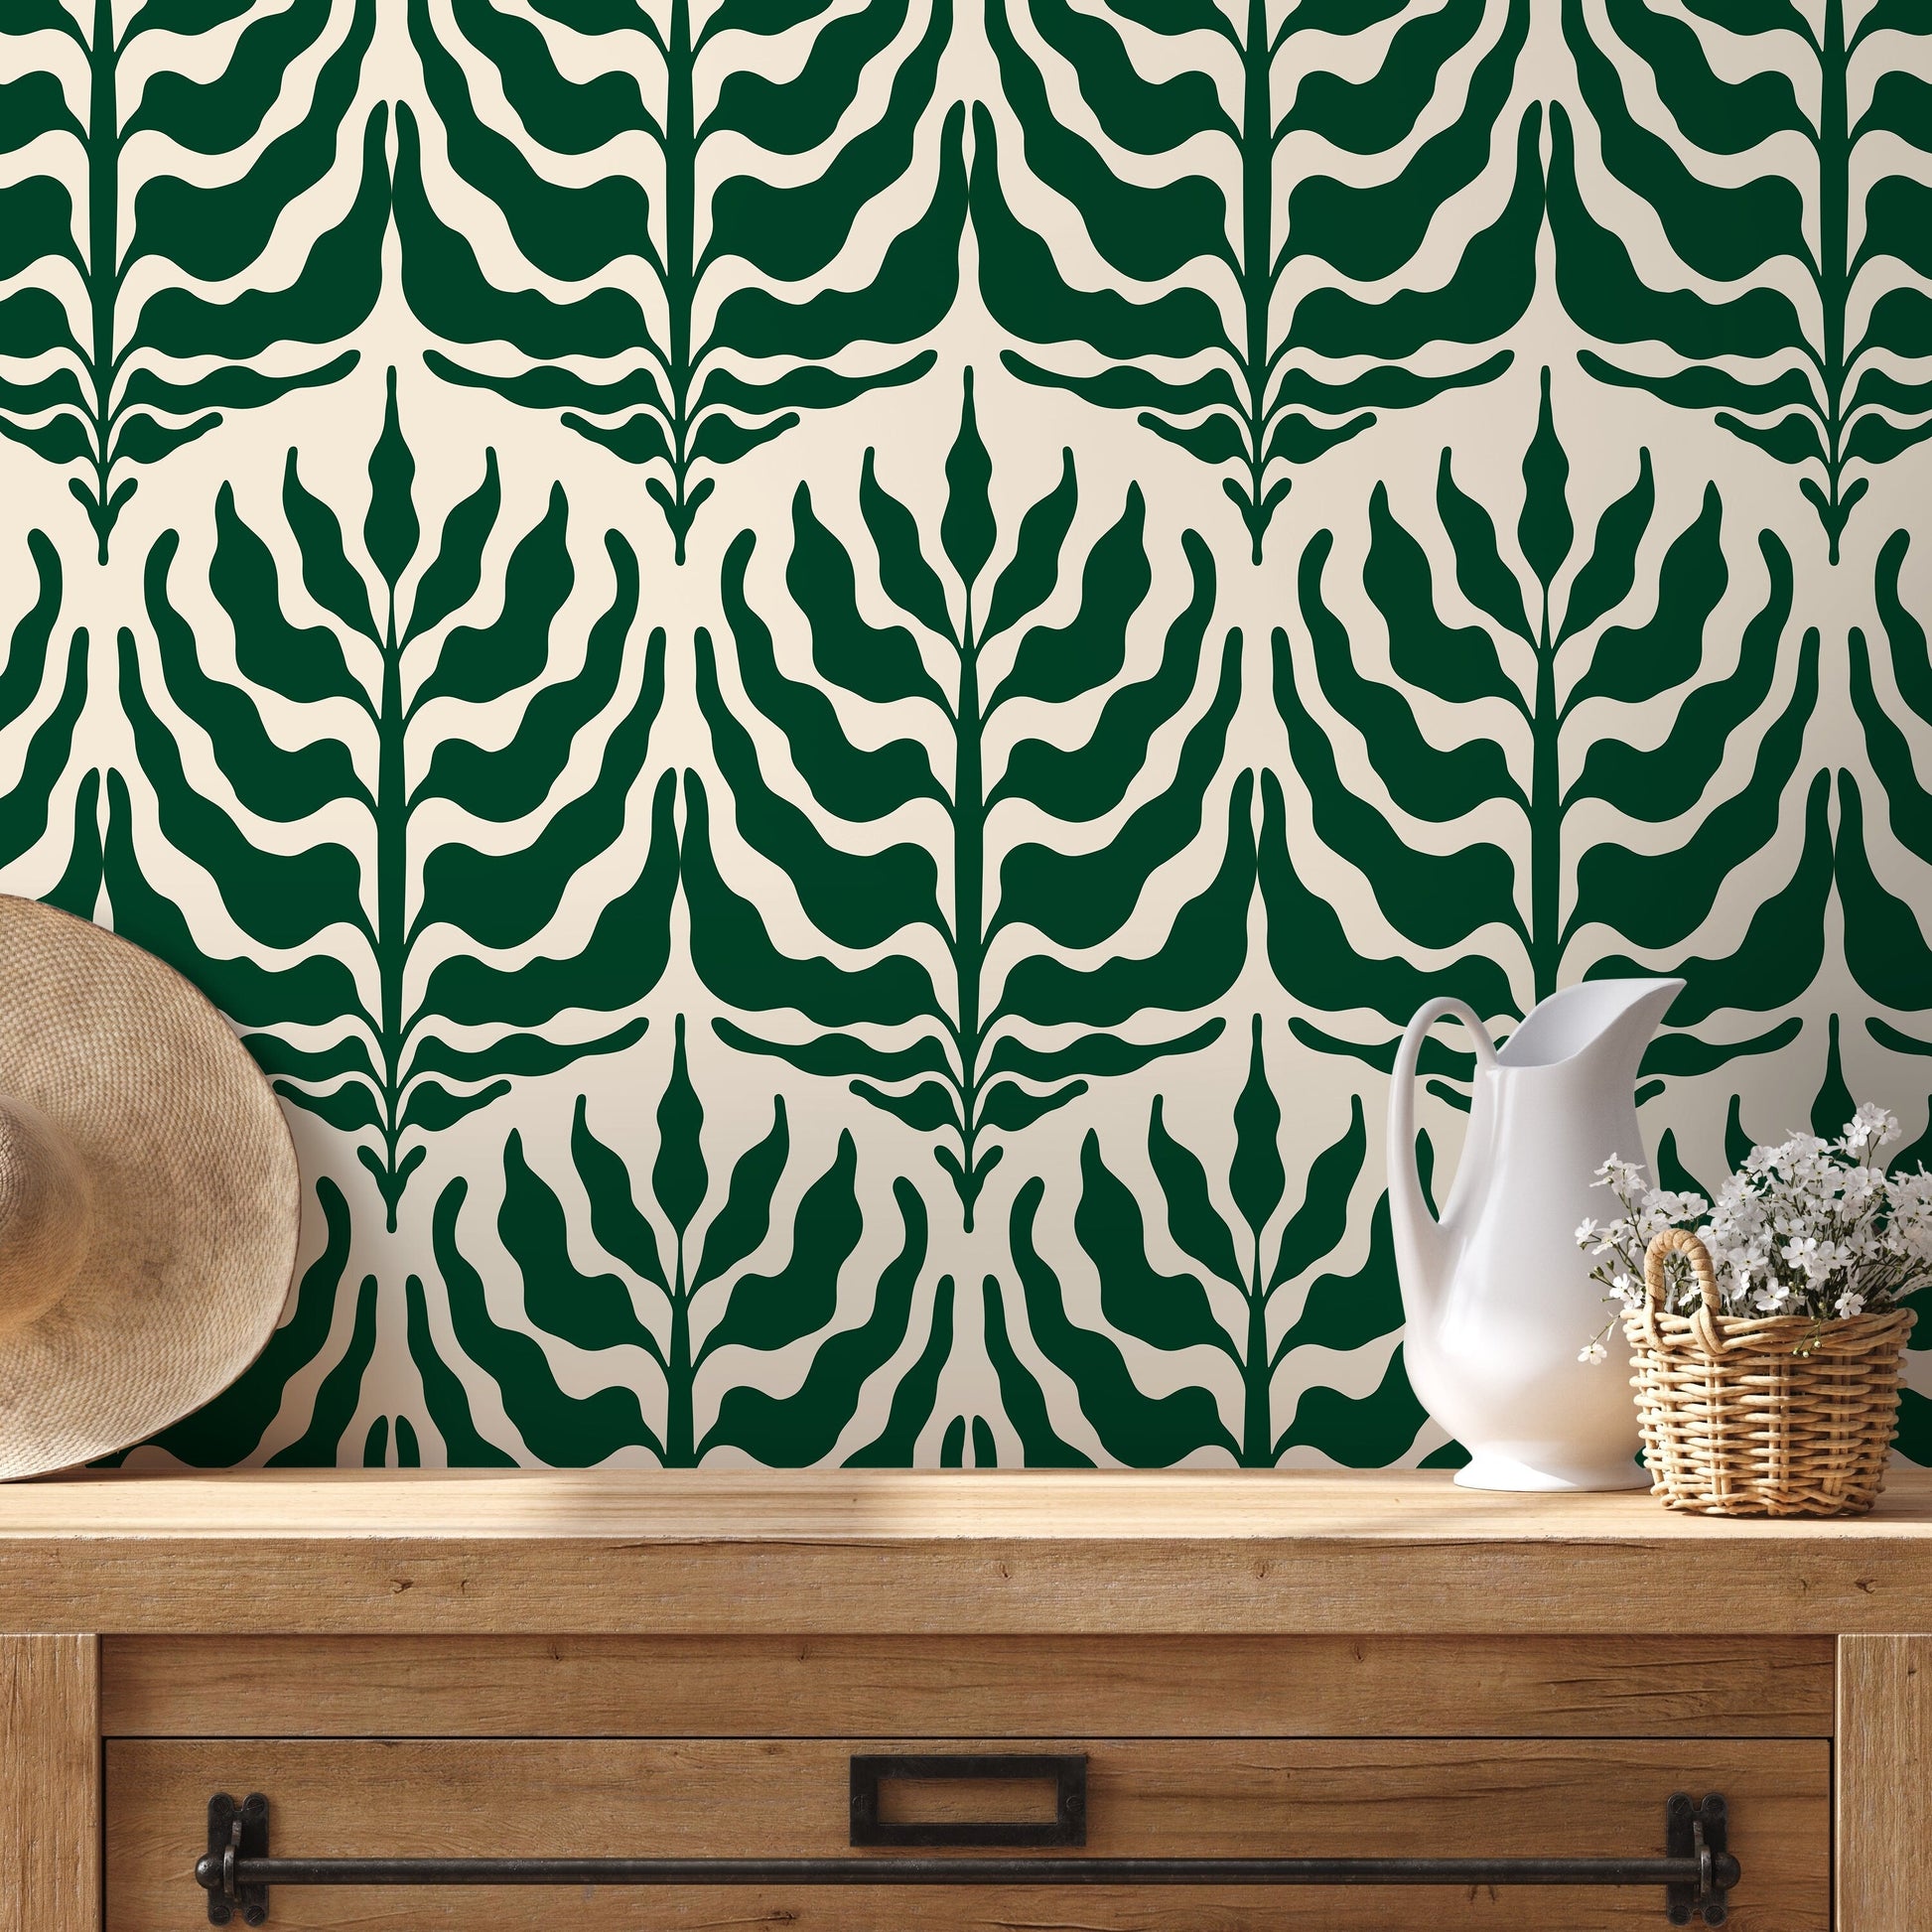 Wallpaper Peel and Stick Wallpaper Removable Wallpaper Home Decor Wall Art Wall Decor Room Decor / Abstract Green Leaves Wallpaper - C411